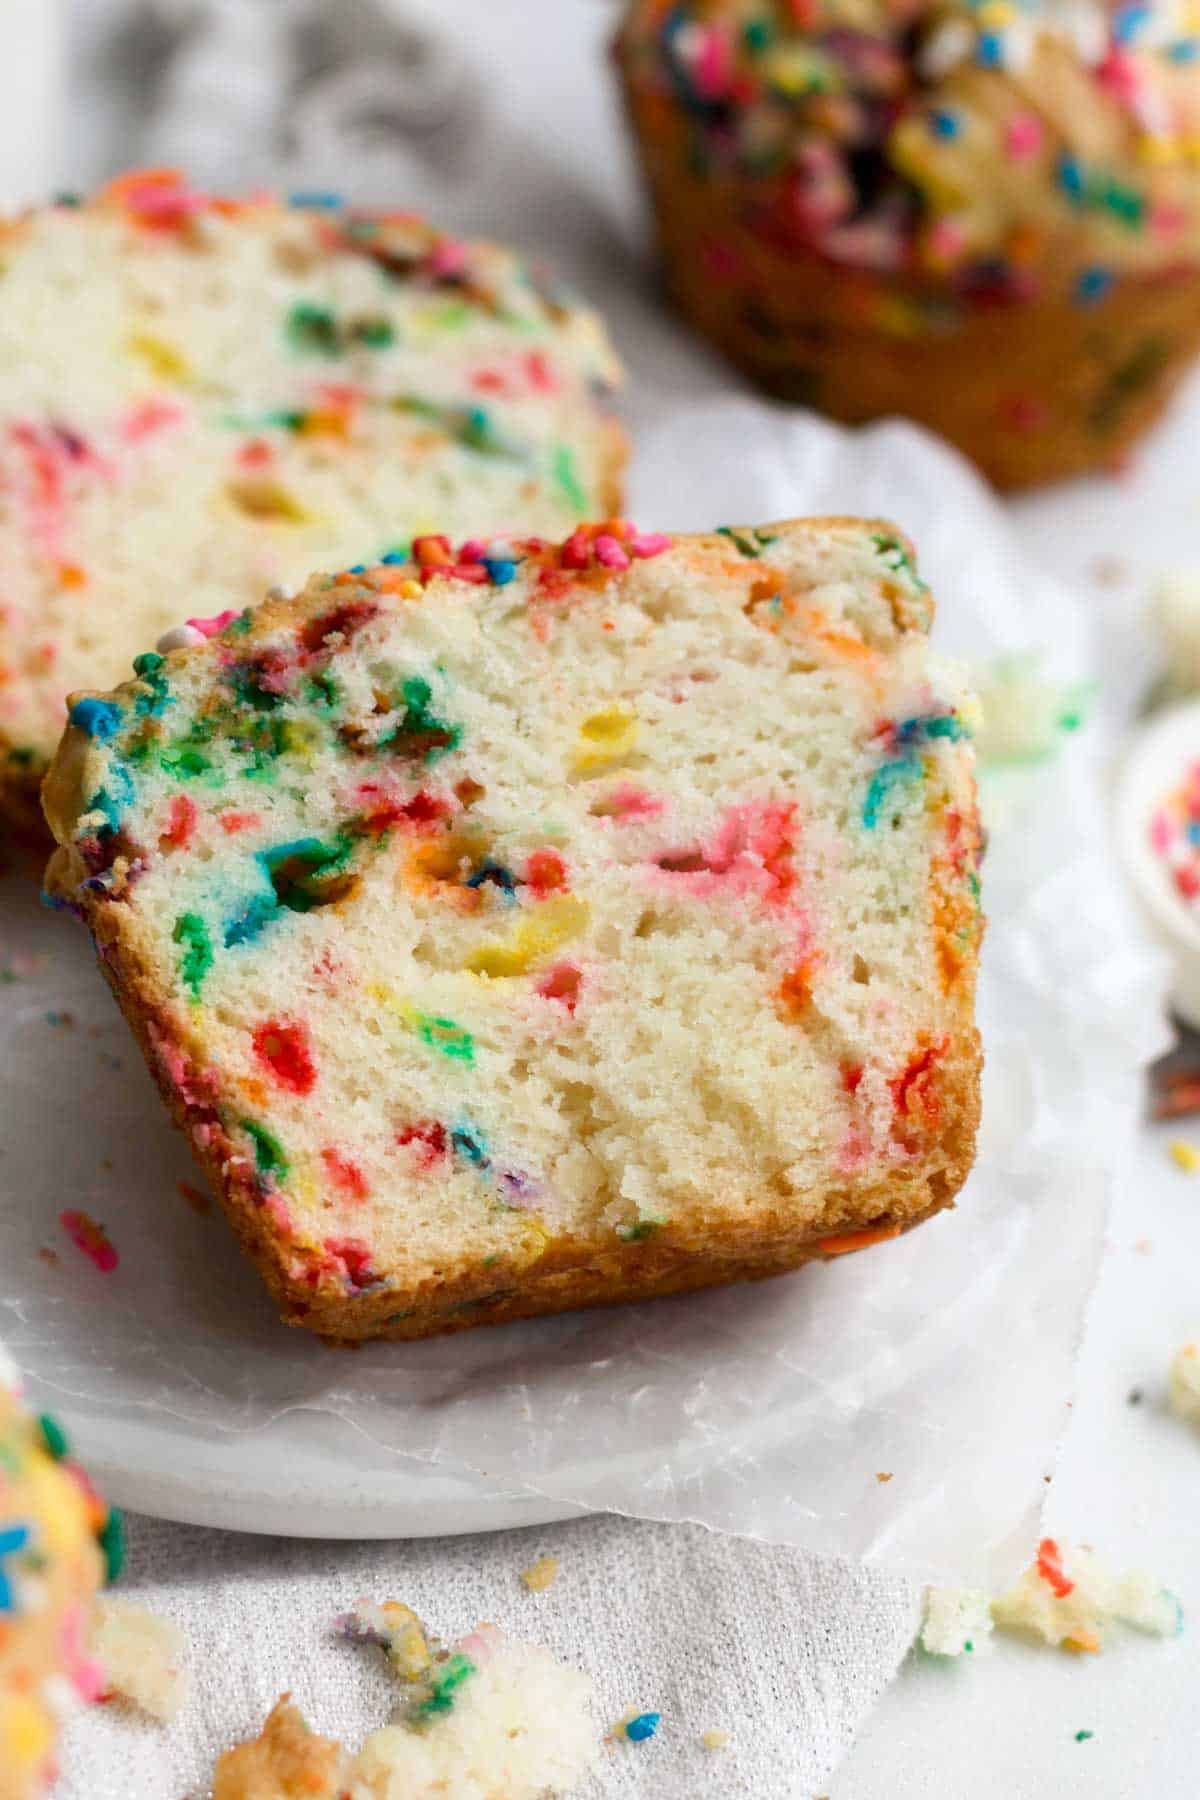 A sliced Birthday Muffin reveals its light and airy vanilla flavored interior stained by rainbow sprinkles.